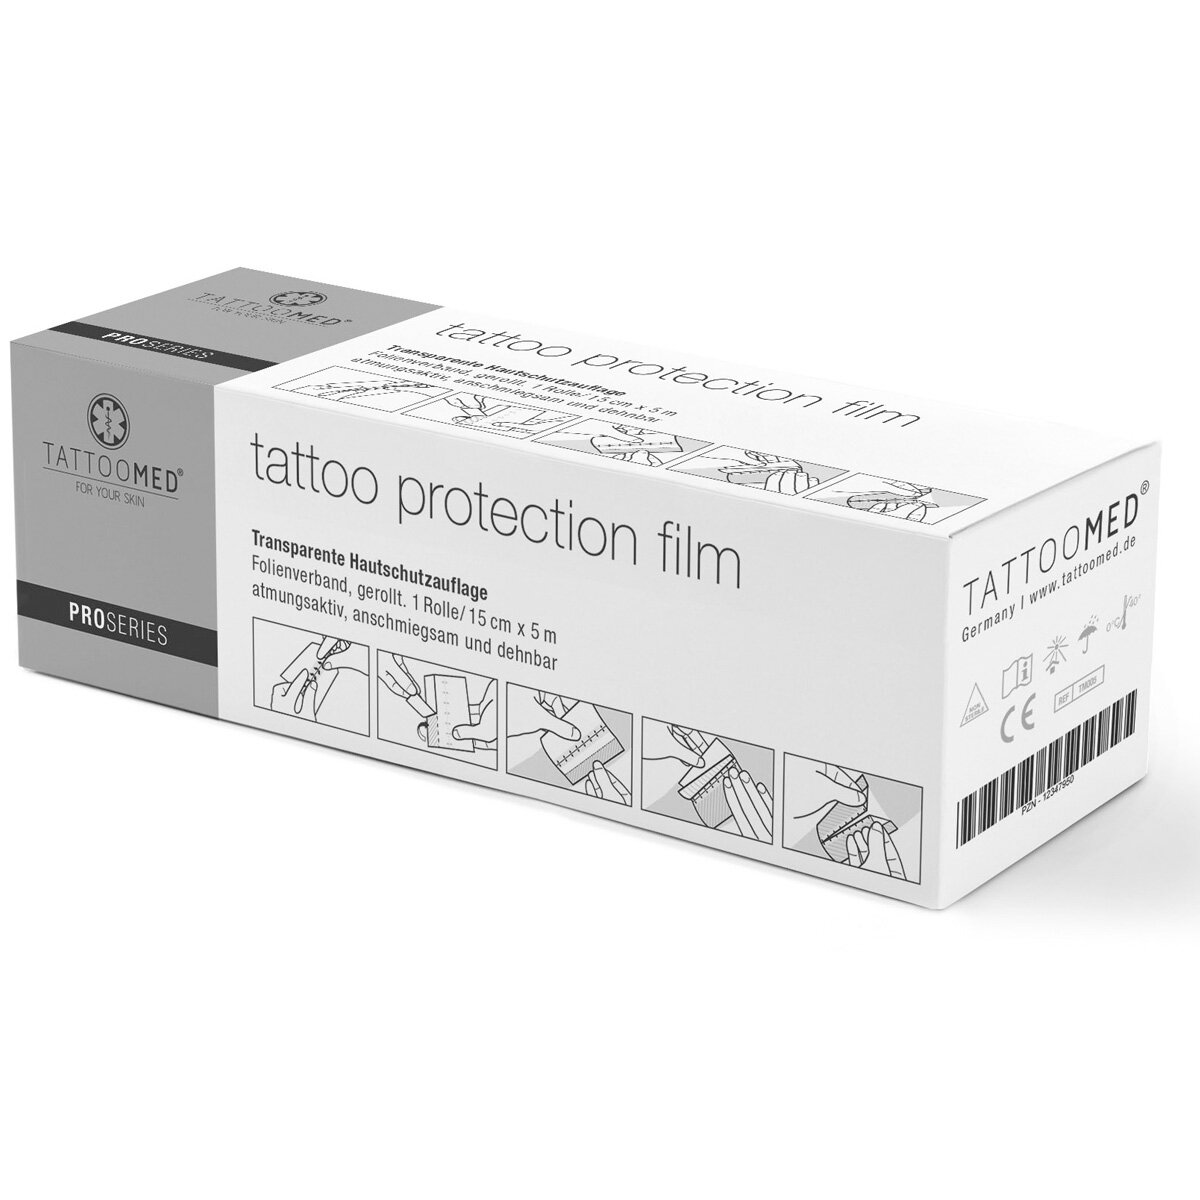 Sorry Mom Tattoo Aftercare Bandage (6.5 ft x 6 in) Clear Tattoo Bandages  Waterproof, Adhesive Tattoo Wrap Bandage - Tattoo Healing Wrap - Tattoo  Film Protection - Second Skin Tattoo Waterproof Bandage